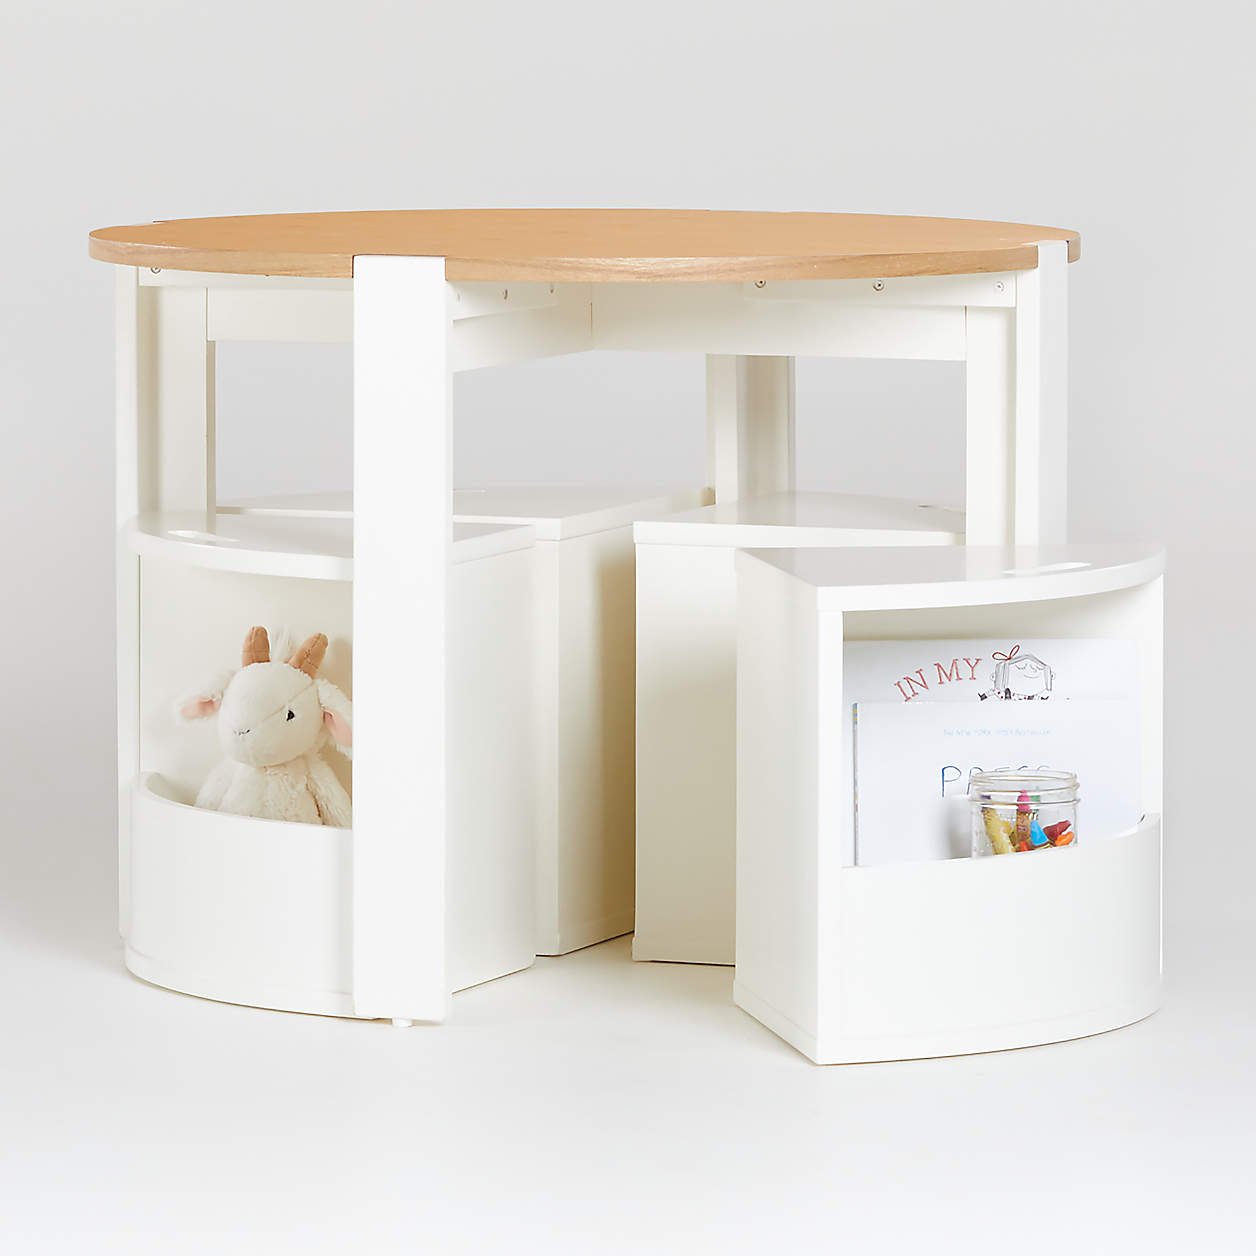 nesting-white-and-natural-play-table-and-chairs-set.jpeg